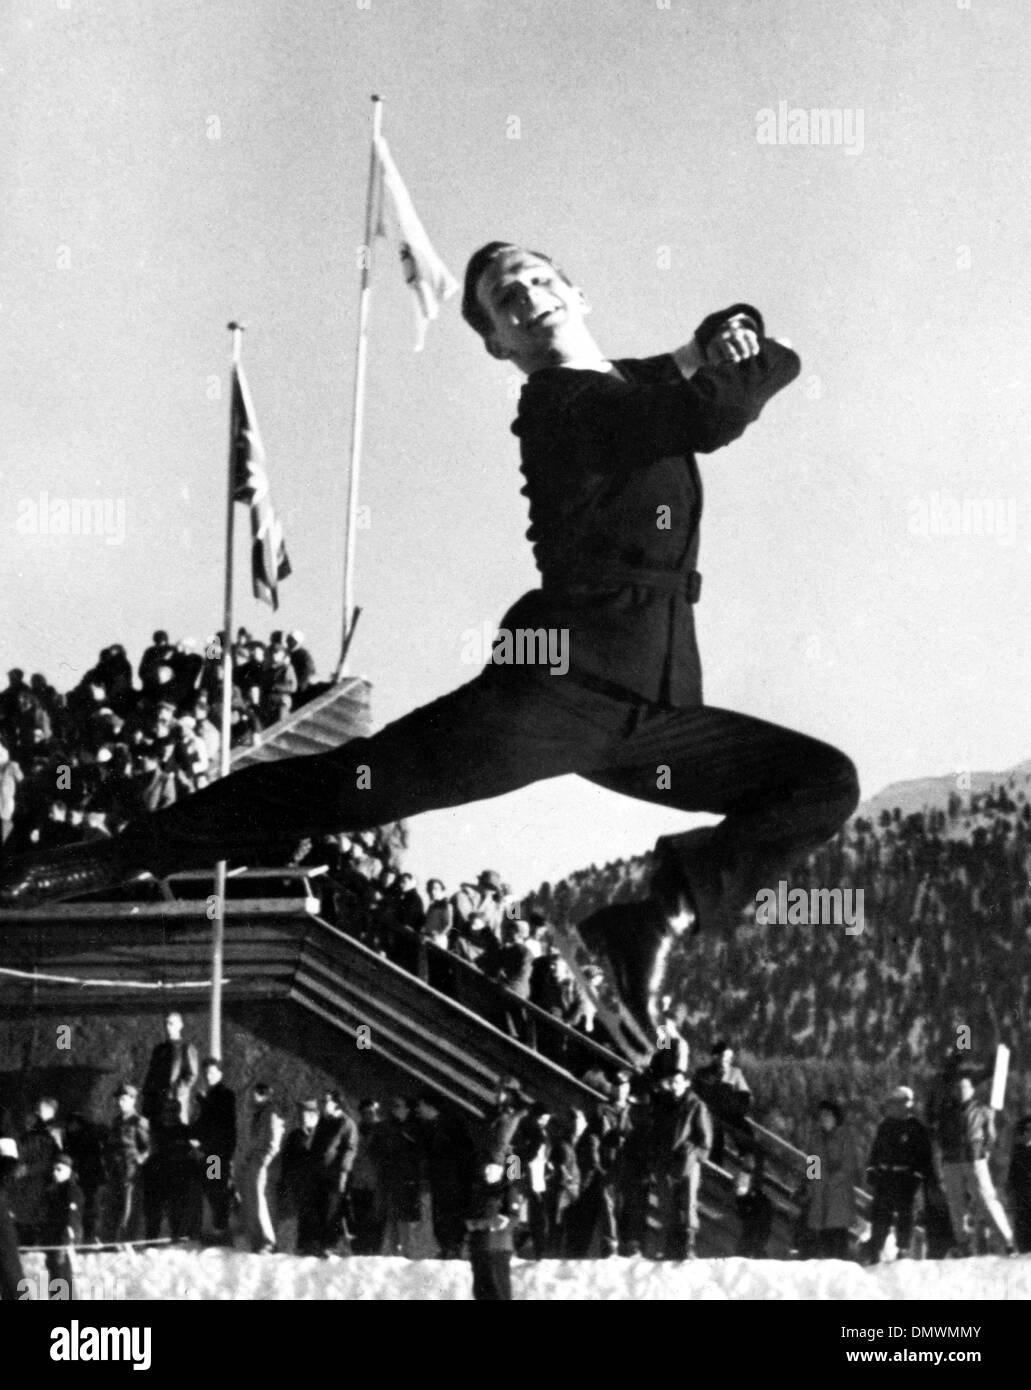 Feb. 6, 1948 - St. Moritz, Switzerland - The American ice-figure skater  RICHARD BUTTON with 19 years old won the gold medal and the Swiss HANS  GERSCHWEITER got the second place. PICTURED: